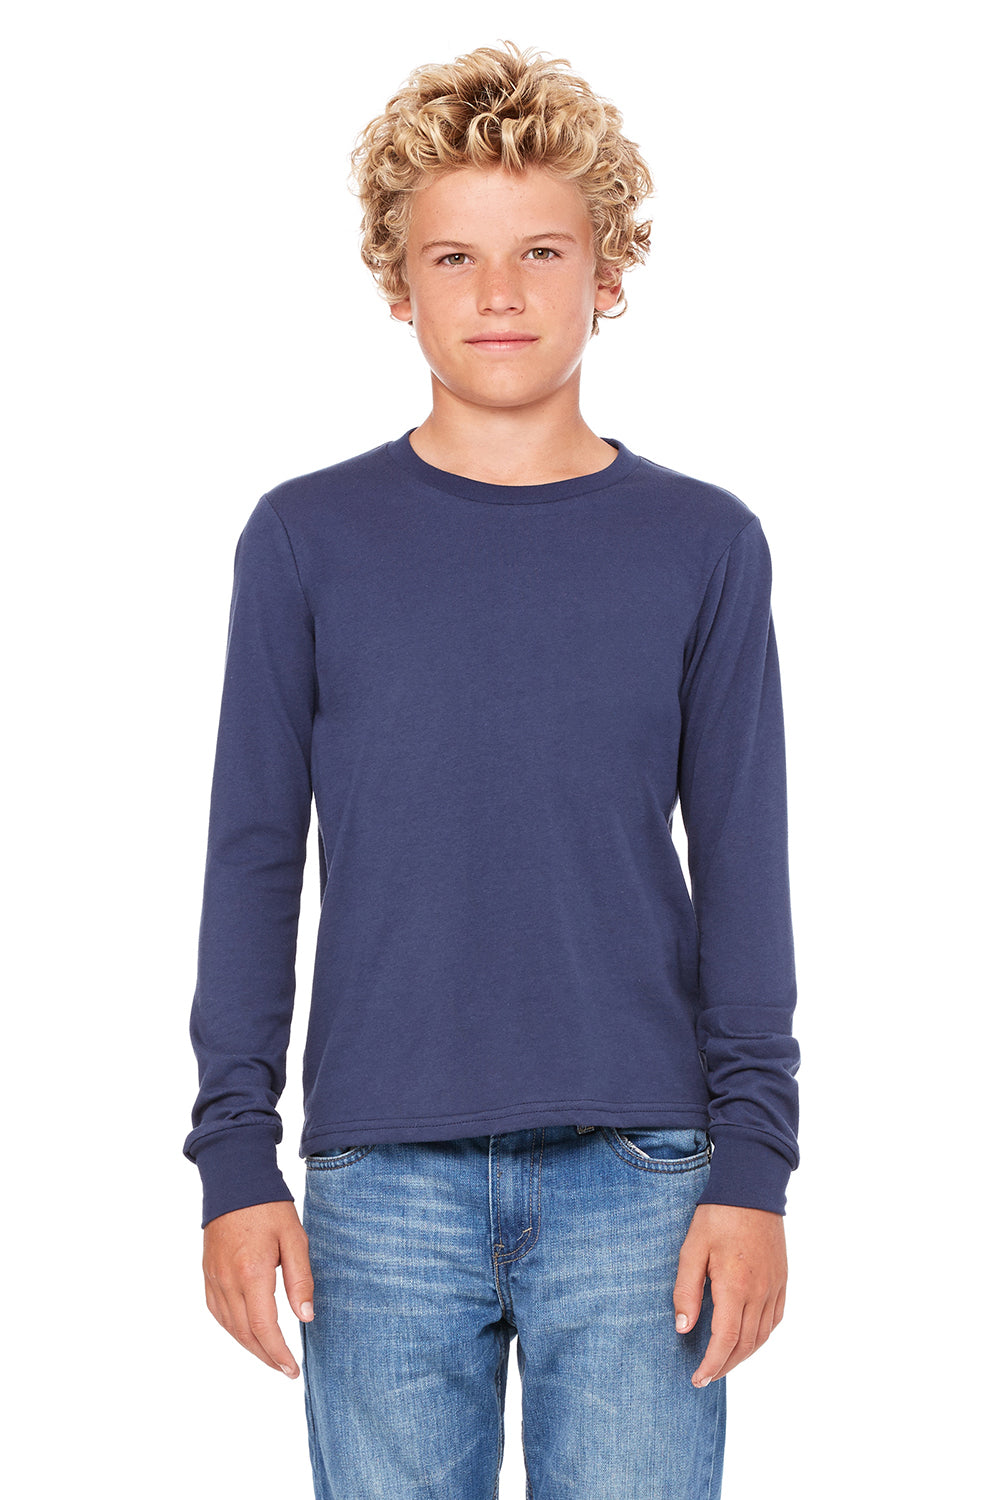 Bella + Canvas 3501Y Youth Jersey Long Sleeve Crewneck T-Shirt Navy Blue Model Front